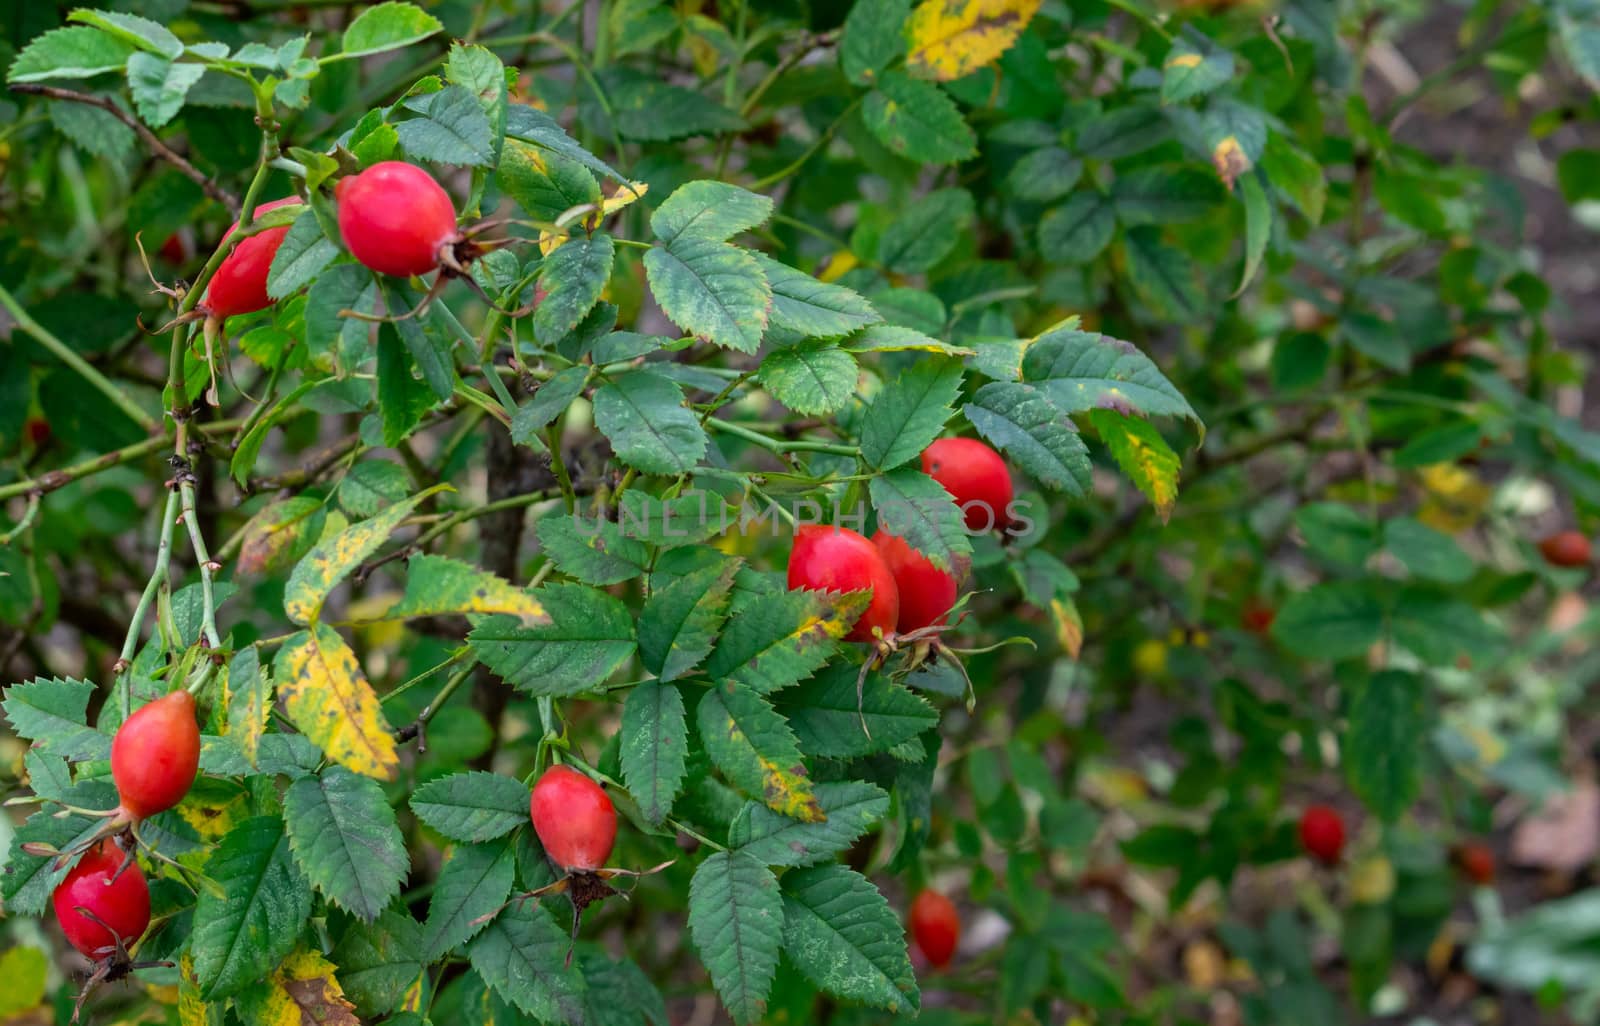 The wild rose Bush.Fresh ripe red rosehip on a green branch with leaves by lapushka62